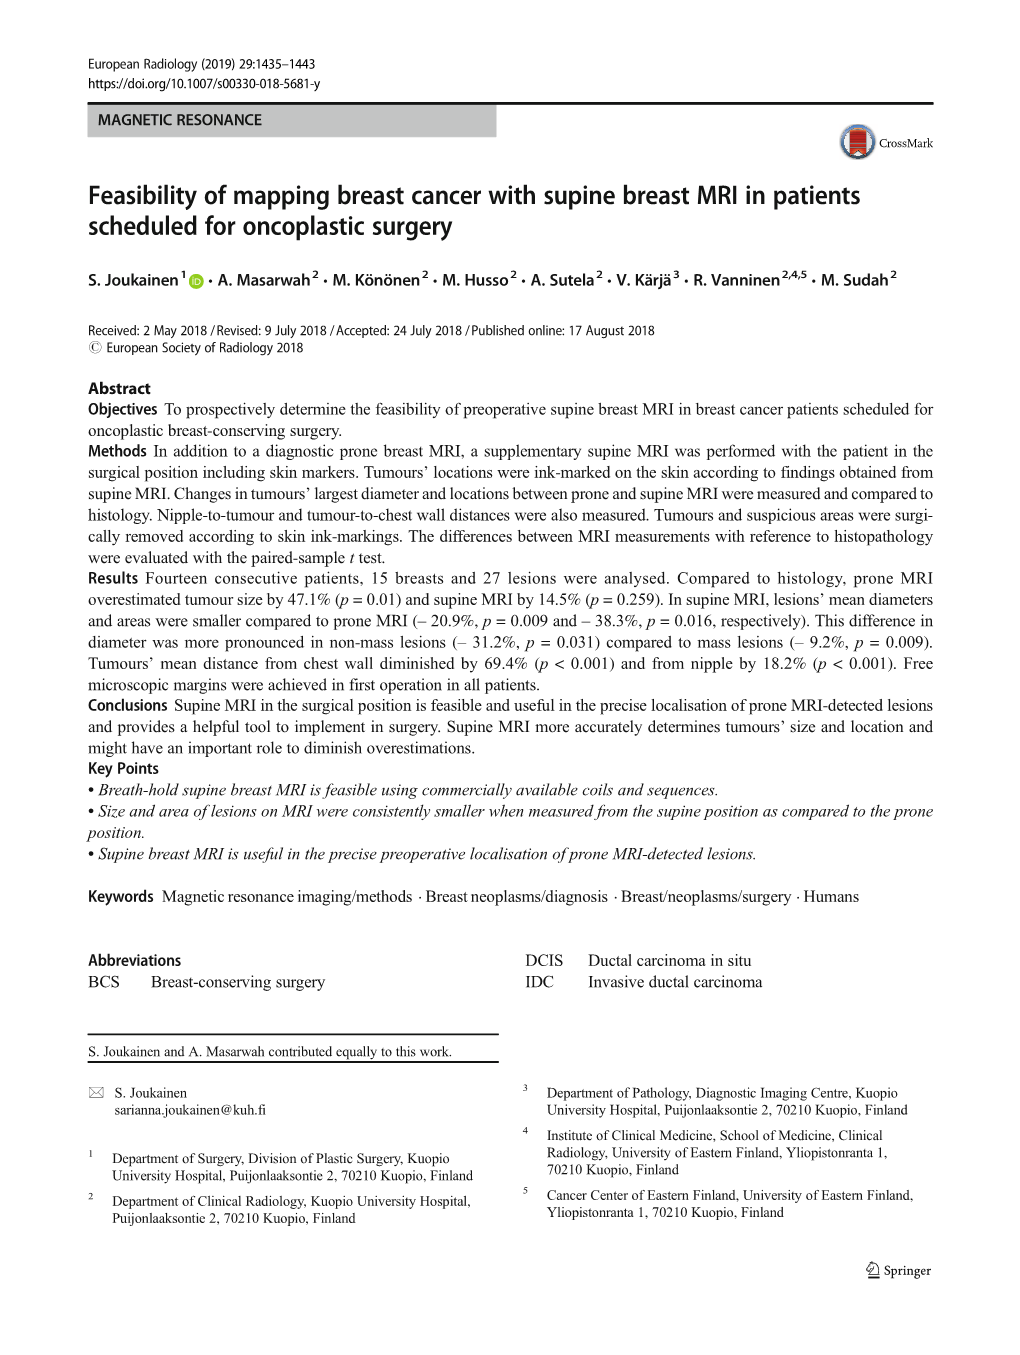 Feasibility of Mapping Breast Cancer with Supine Breast MRI in Patients Scheduled for Oncoplastic Surgery